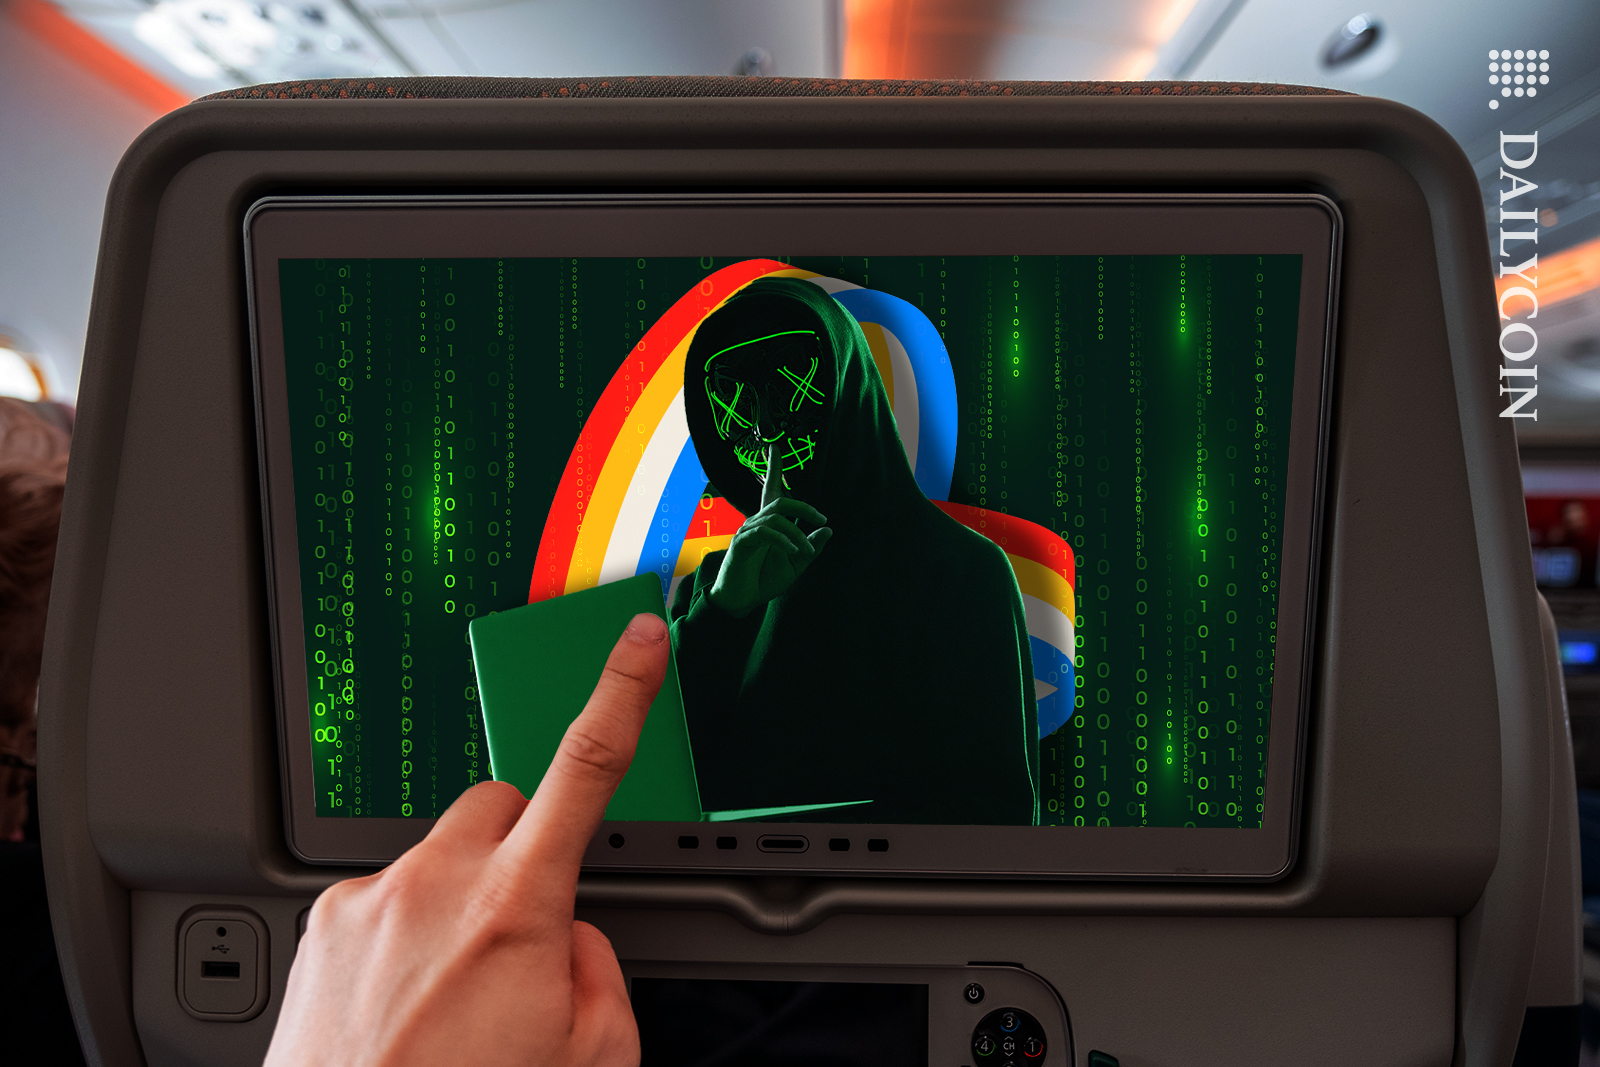 Velodrome getting hacked on a plane.